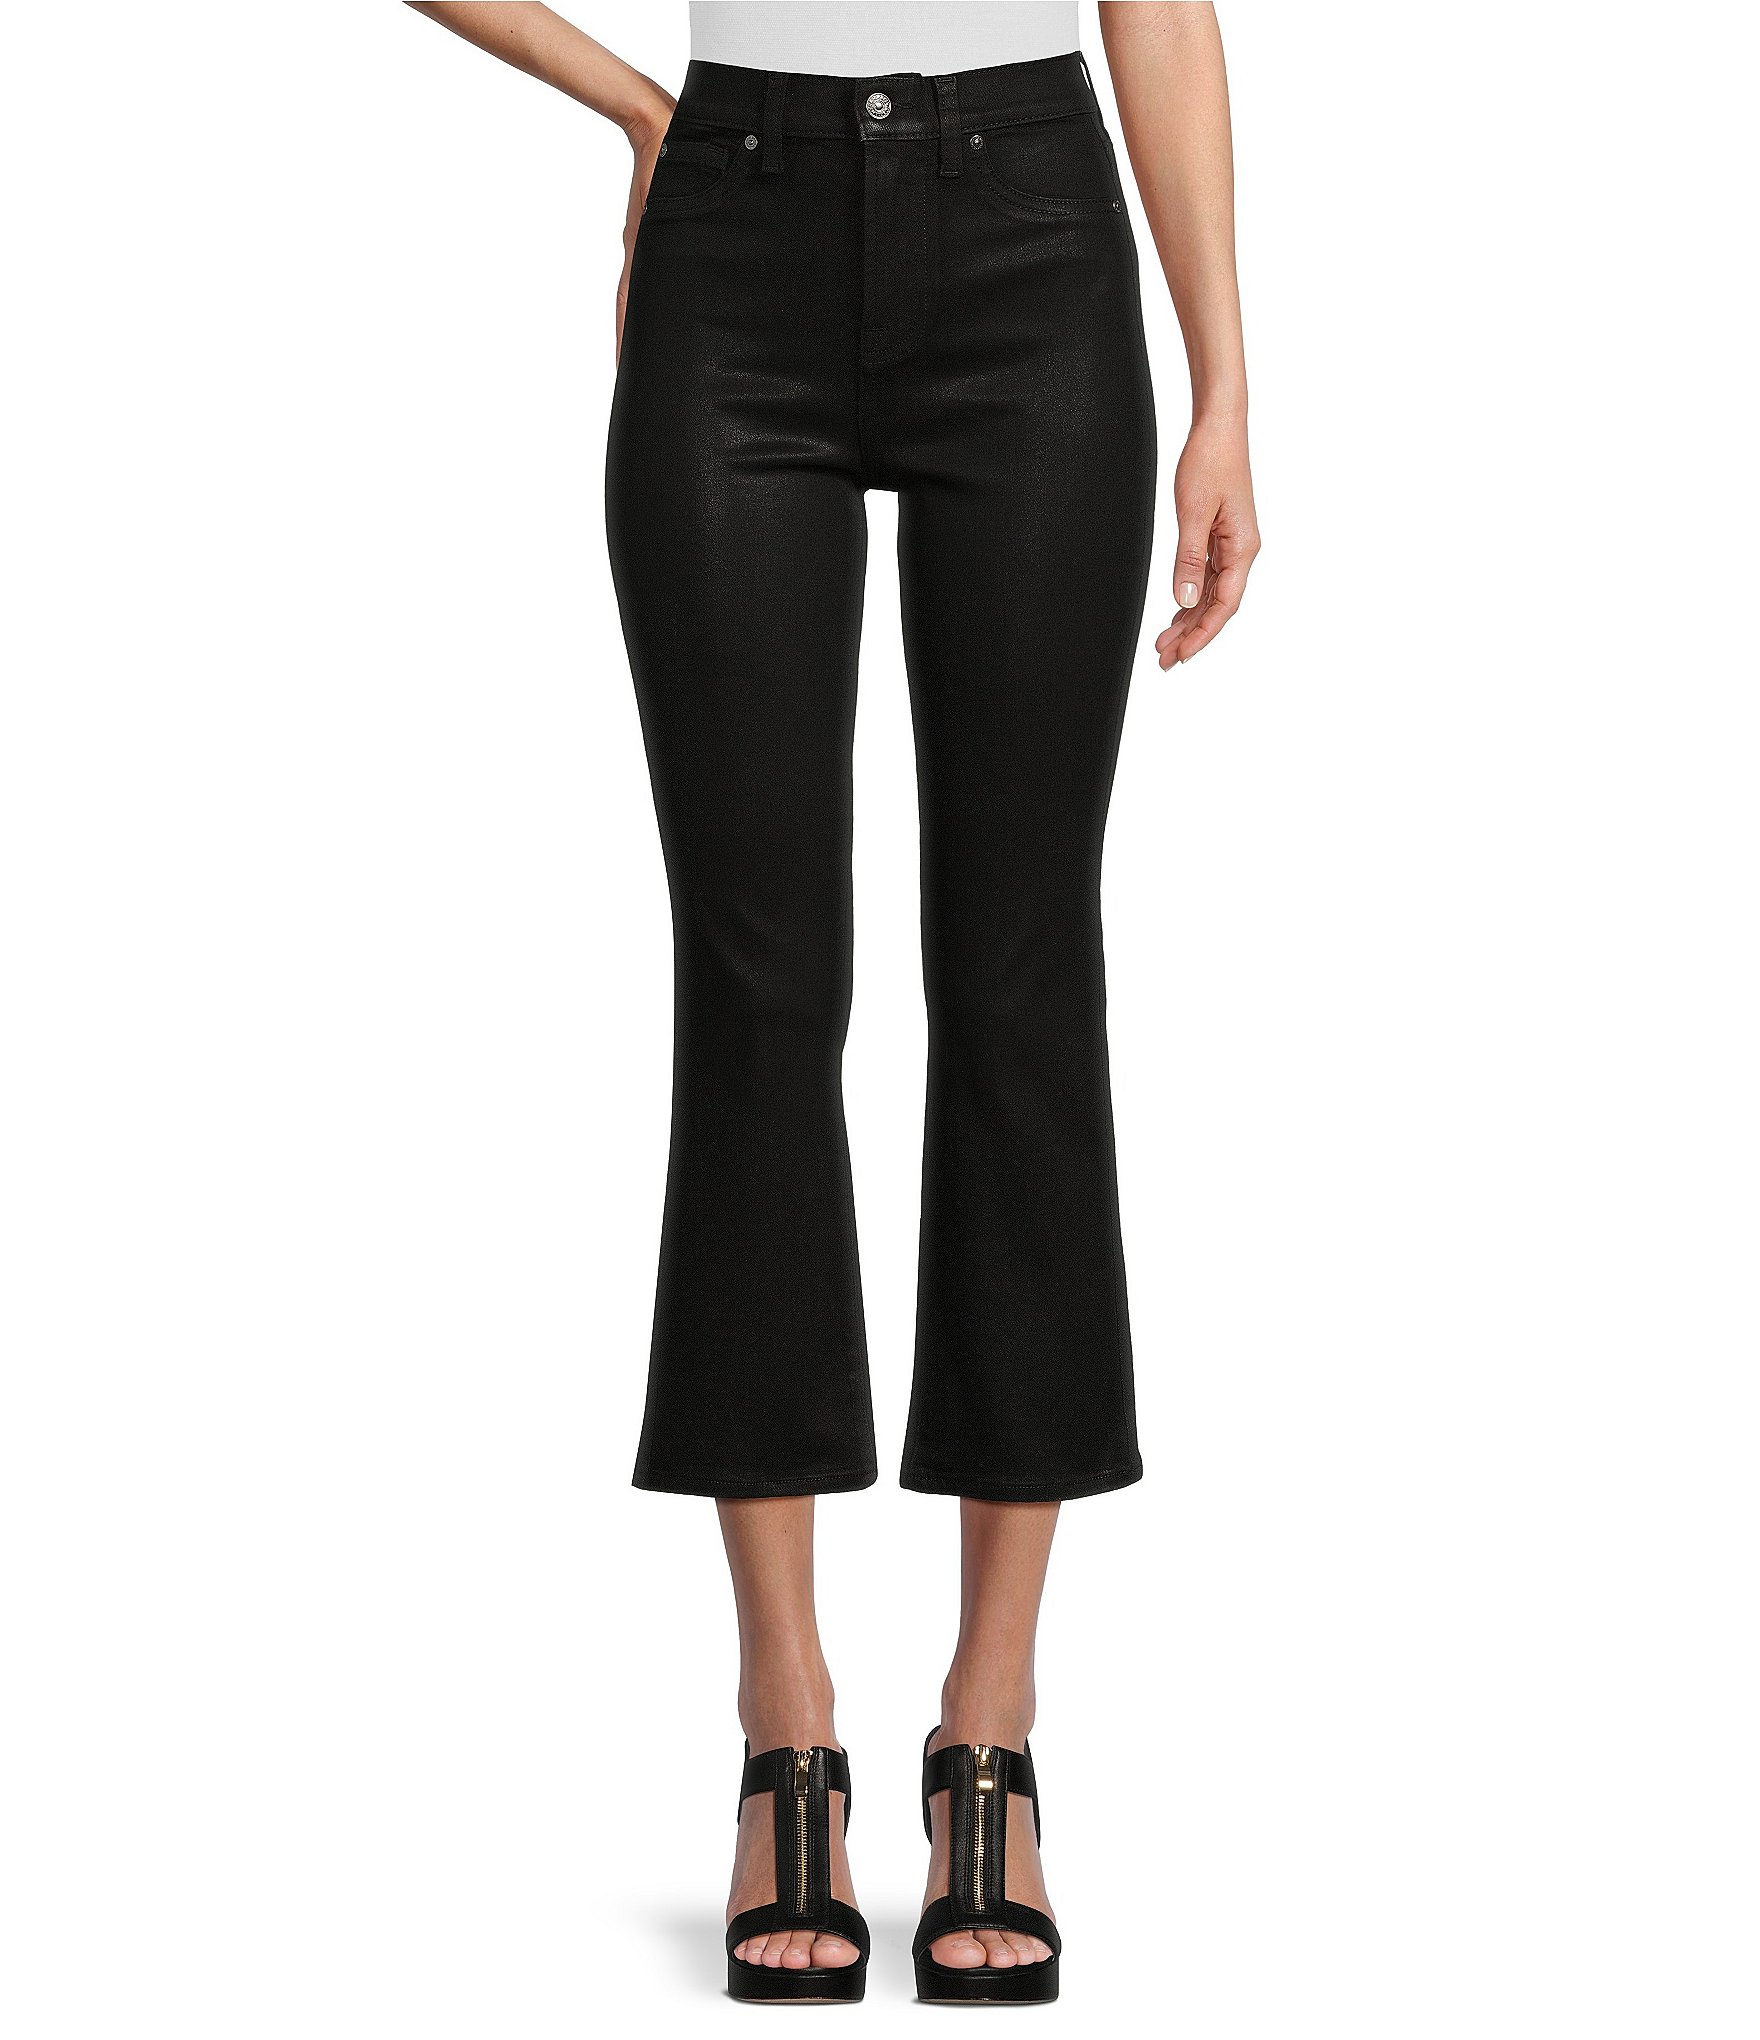 Leather Look High Waisted Leggings - Marks and Spencer Cyprus